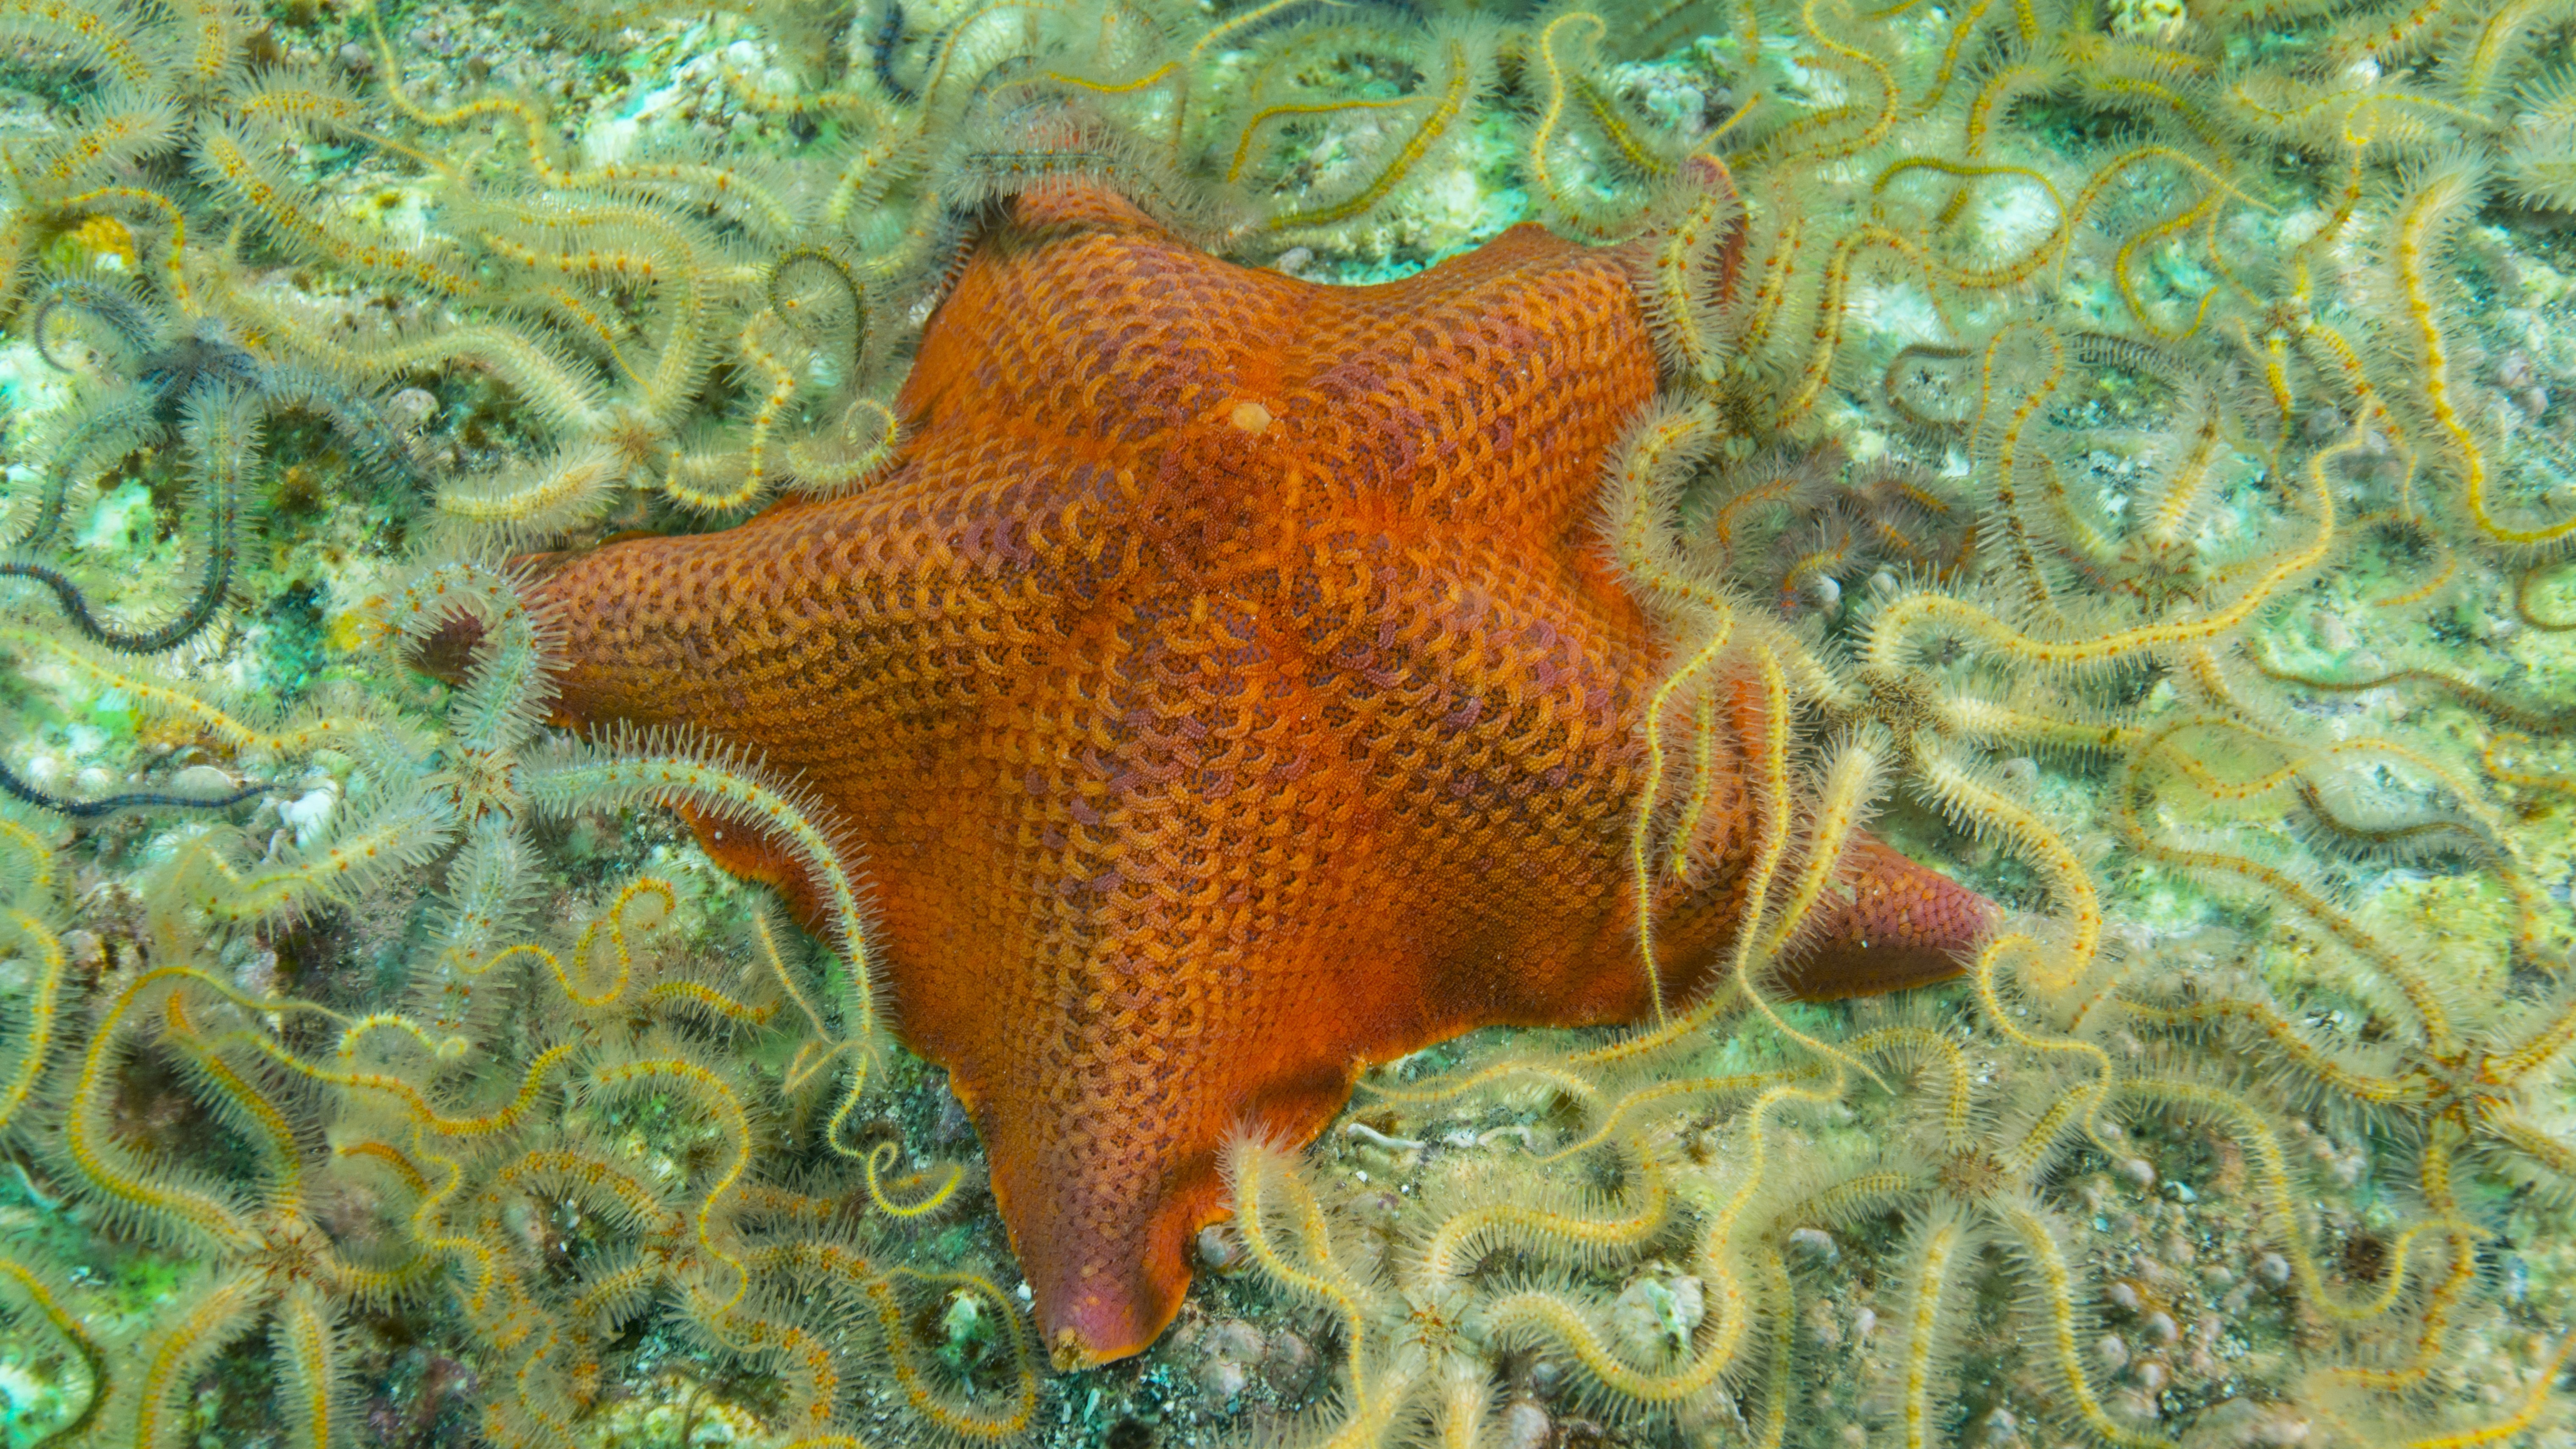 The starfish's whole body is a head